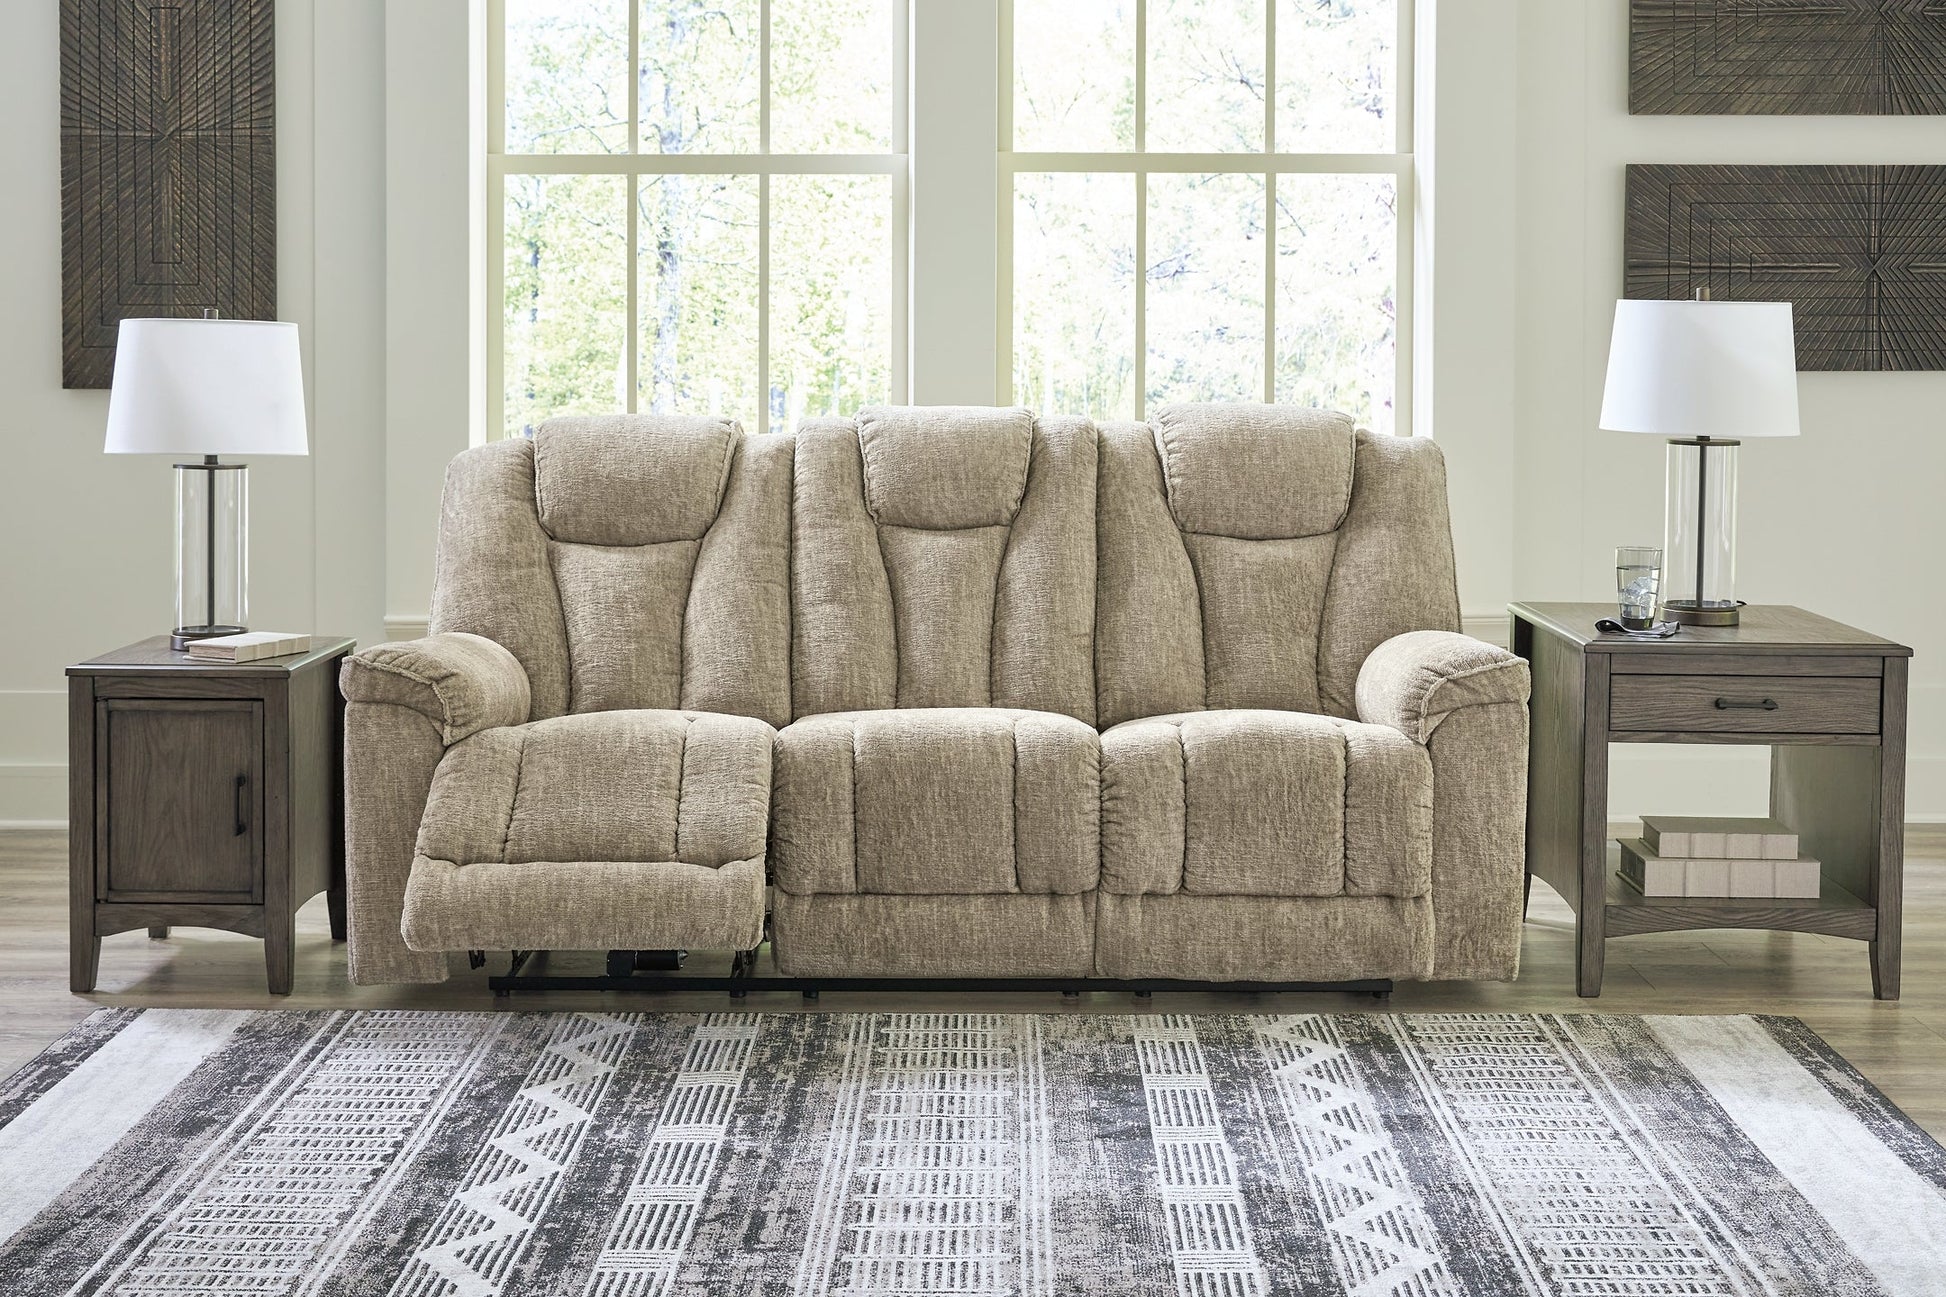 Hindmarsh PWR REC Sofa with ADJ Headrest at Towne & Country Furniture (AL) furniture, home furniture, home decor, sofa, bedding